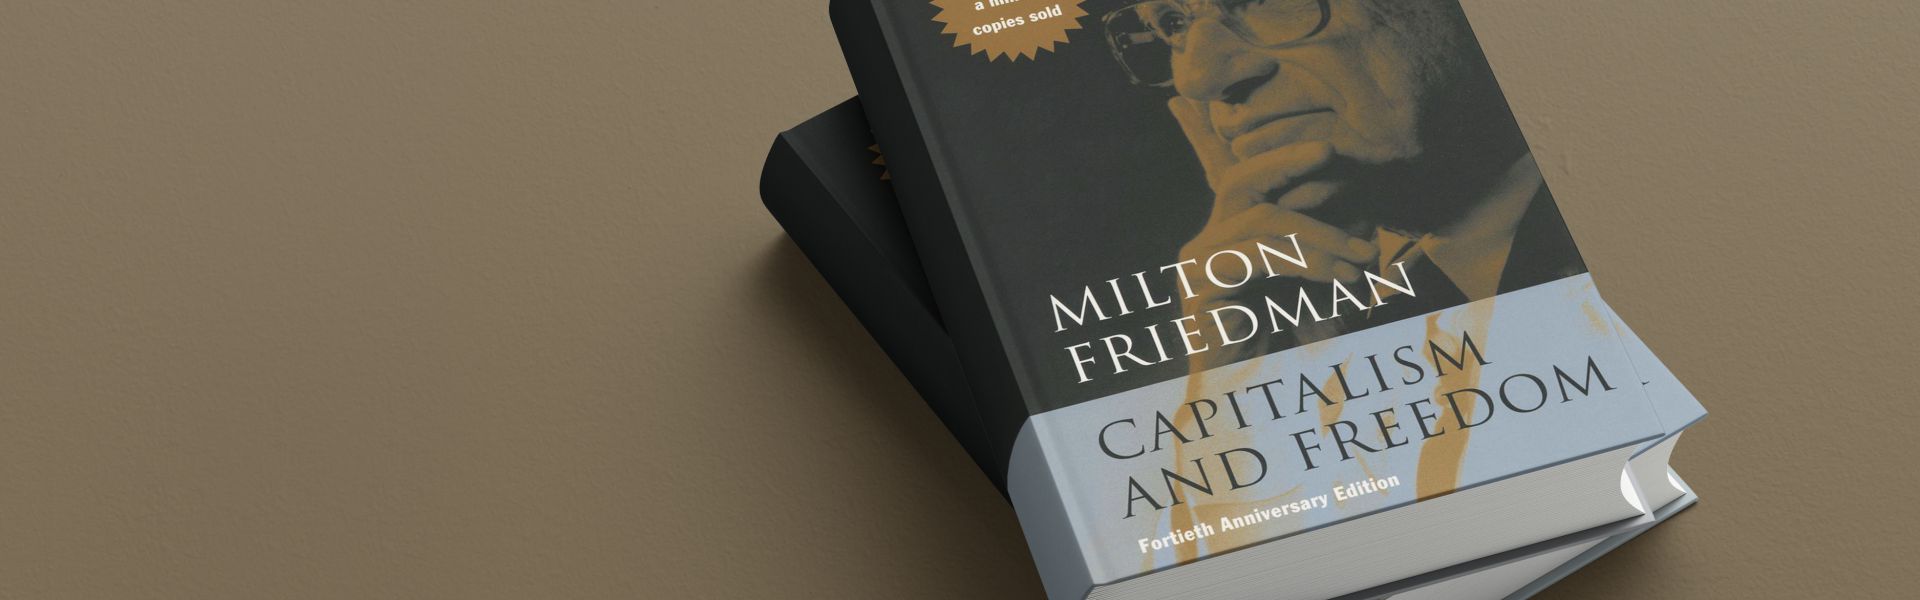 capitalism and freedom book